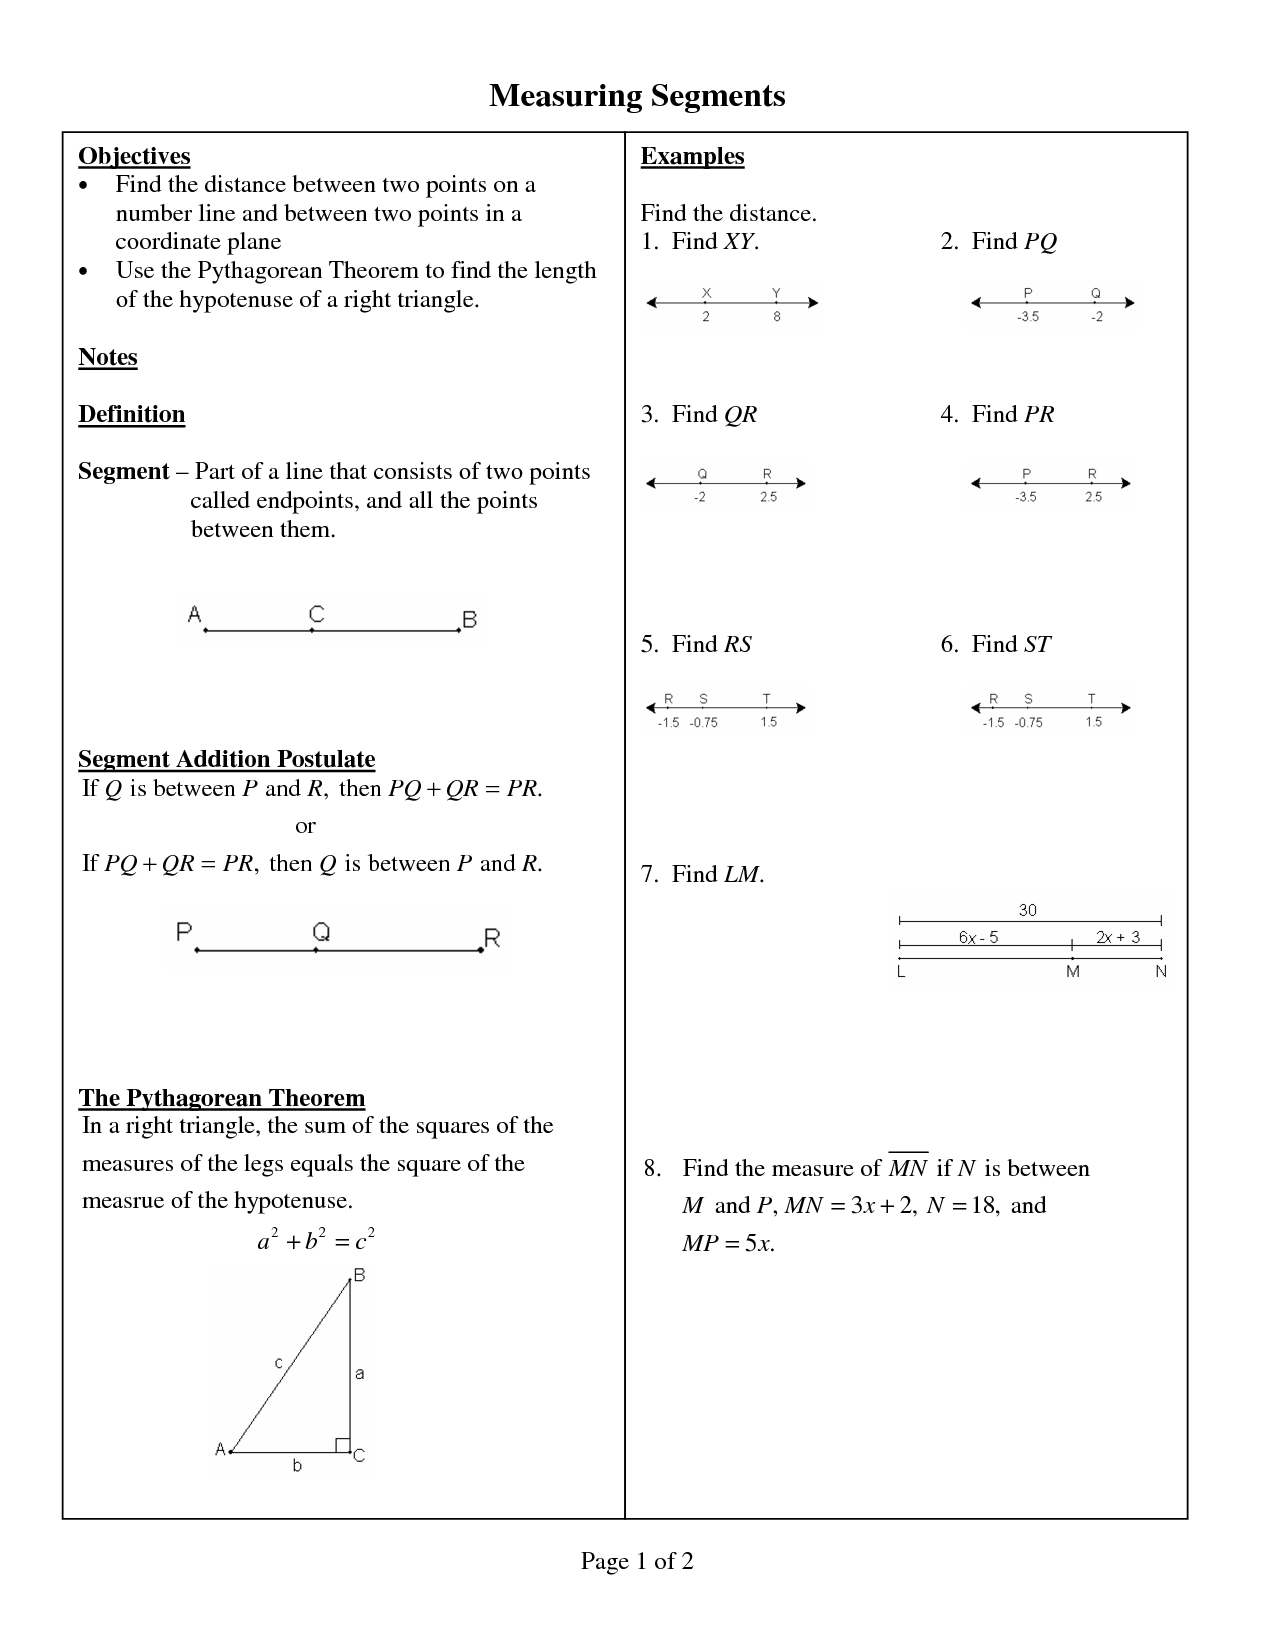 19 Best Images Of Measuring Angles Worksheet 6th Grade 6th Grade Math Worksheets Angles